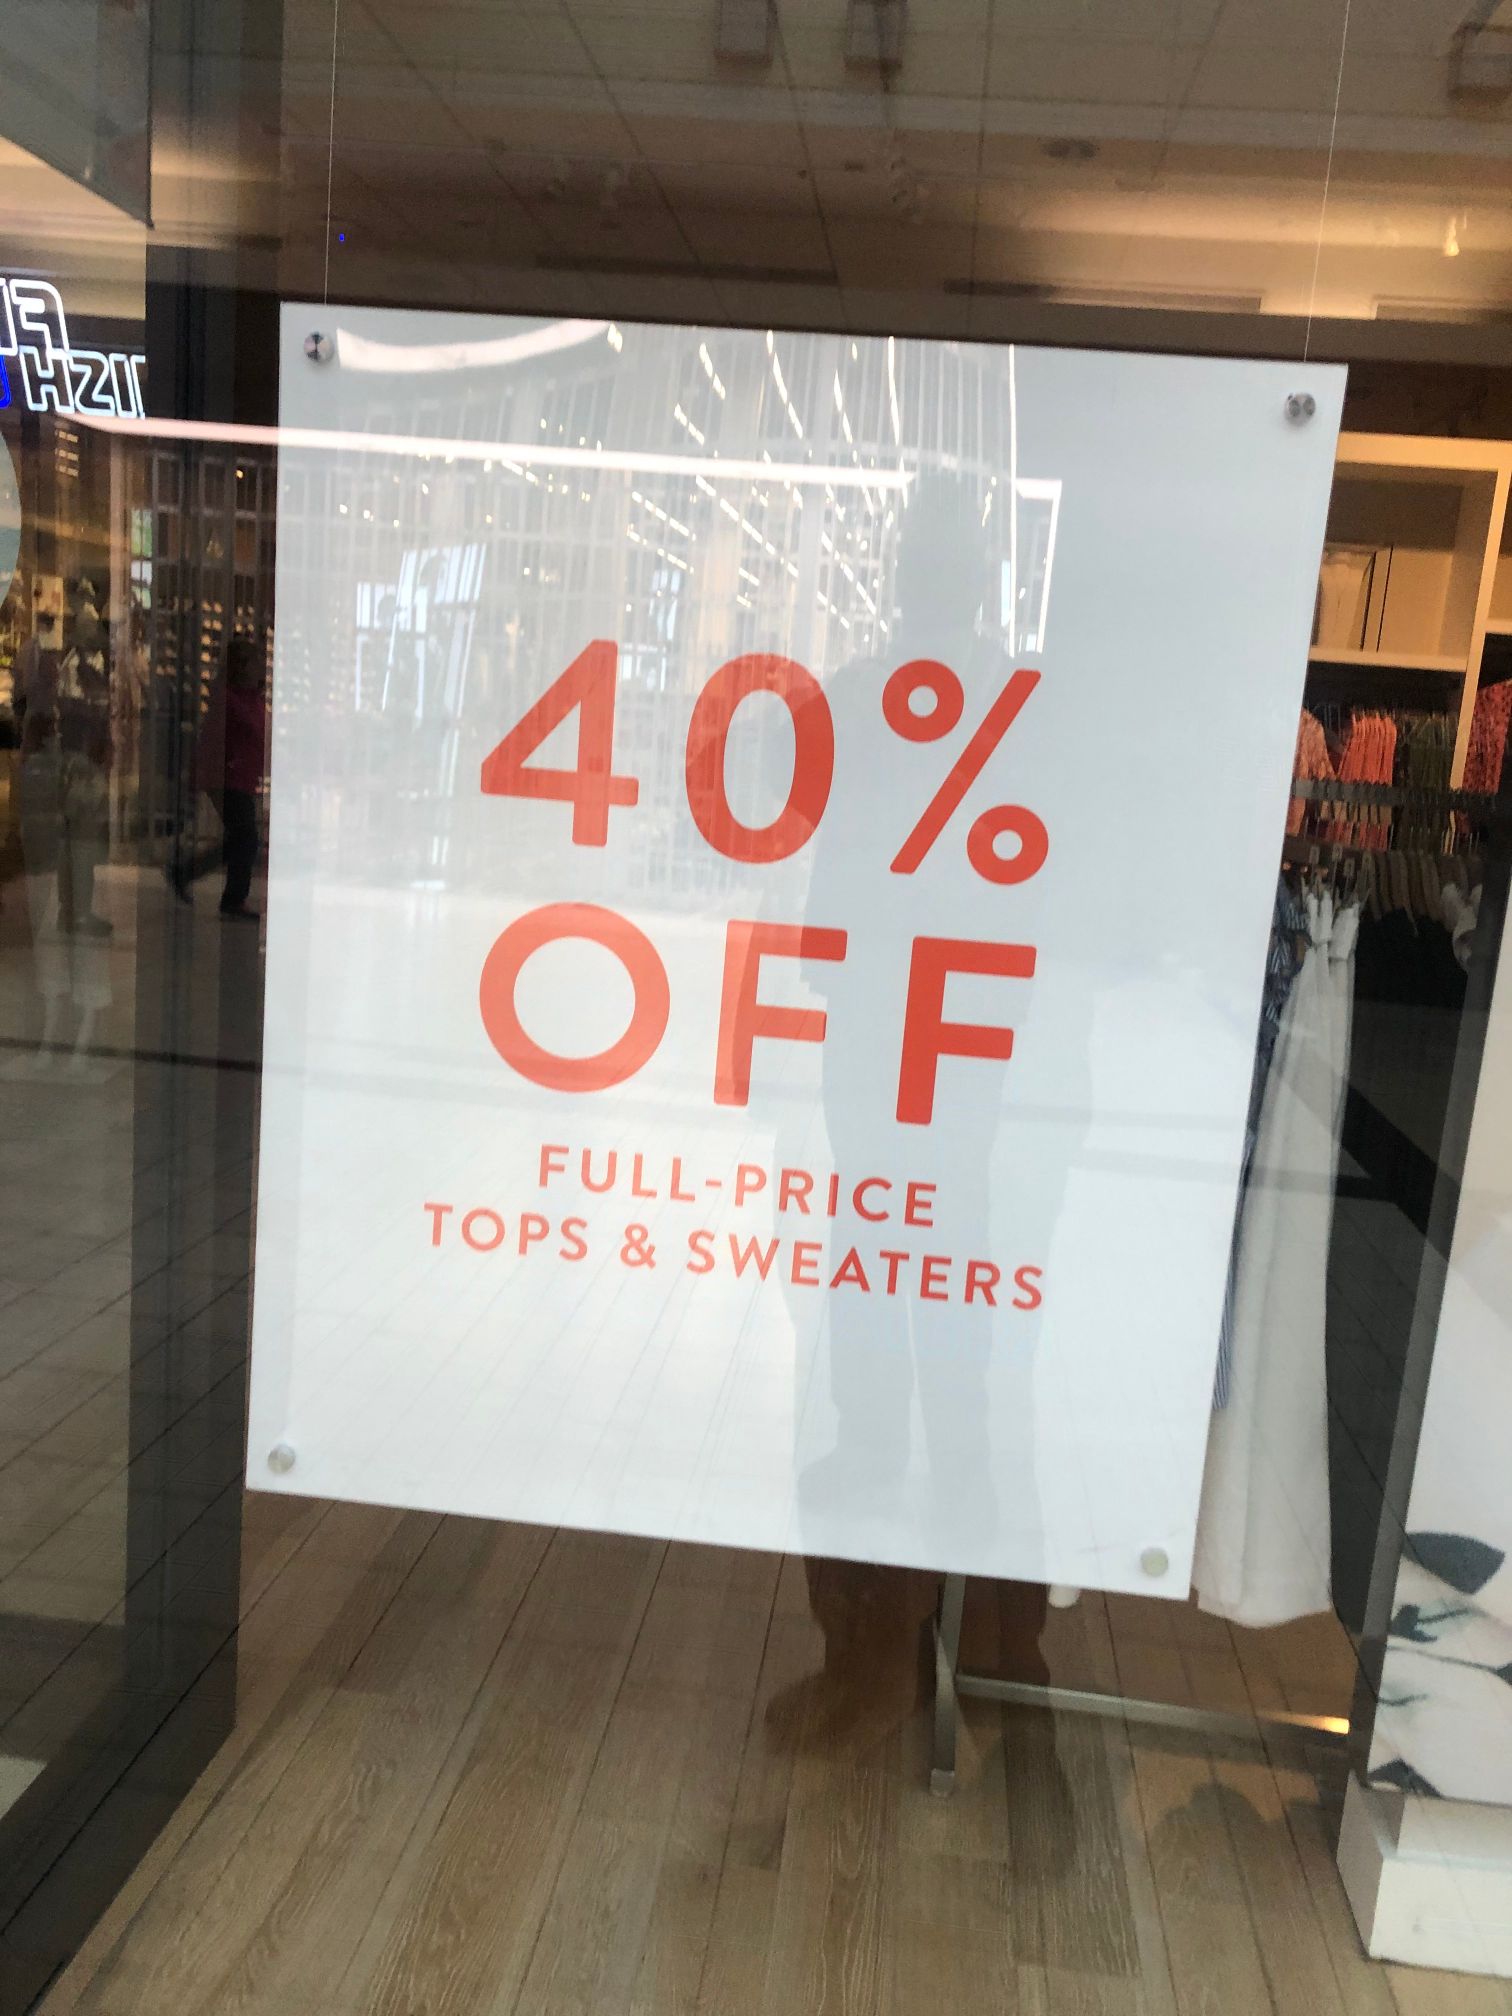 40% off hanging banner in store window 